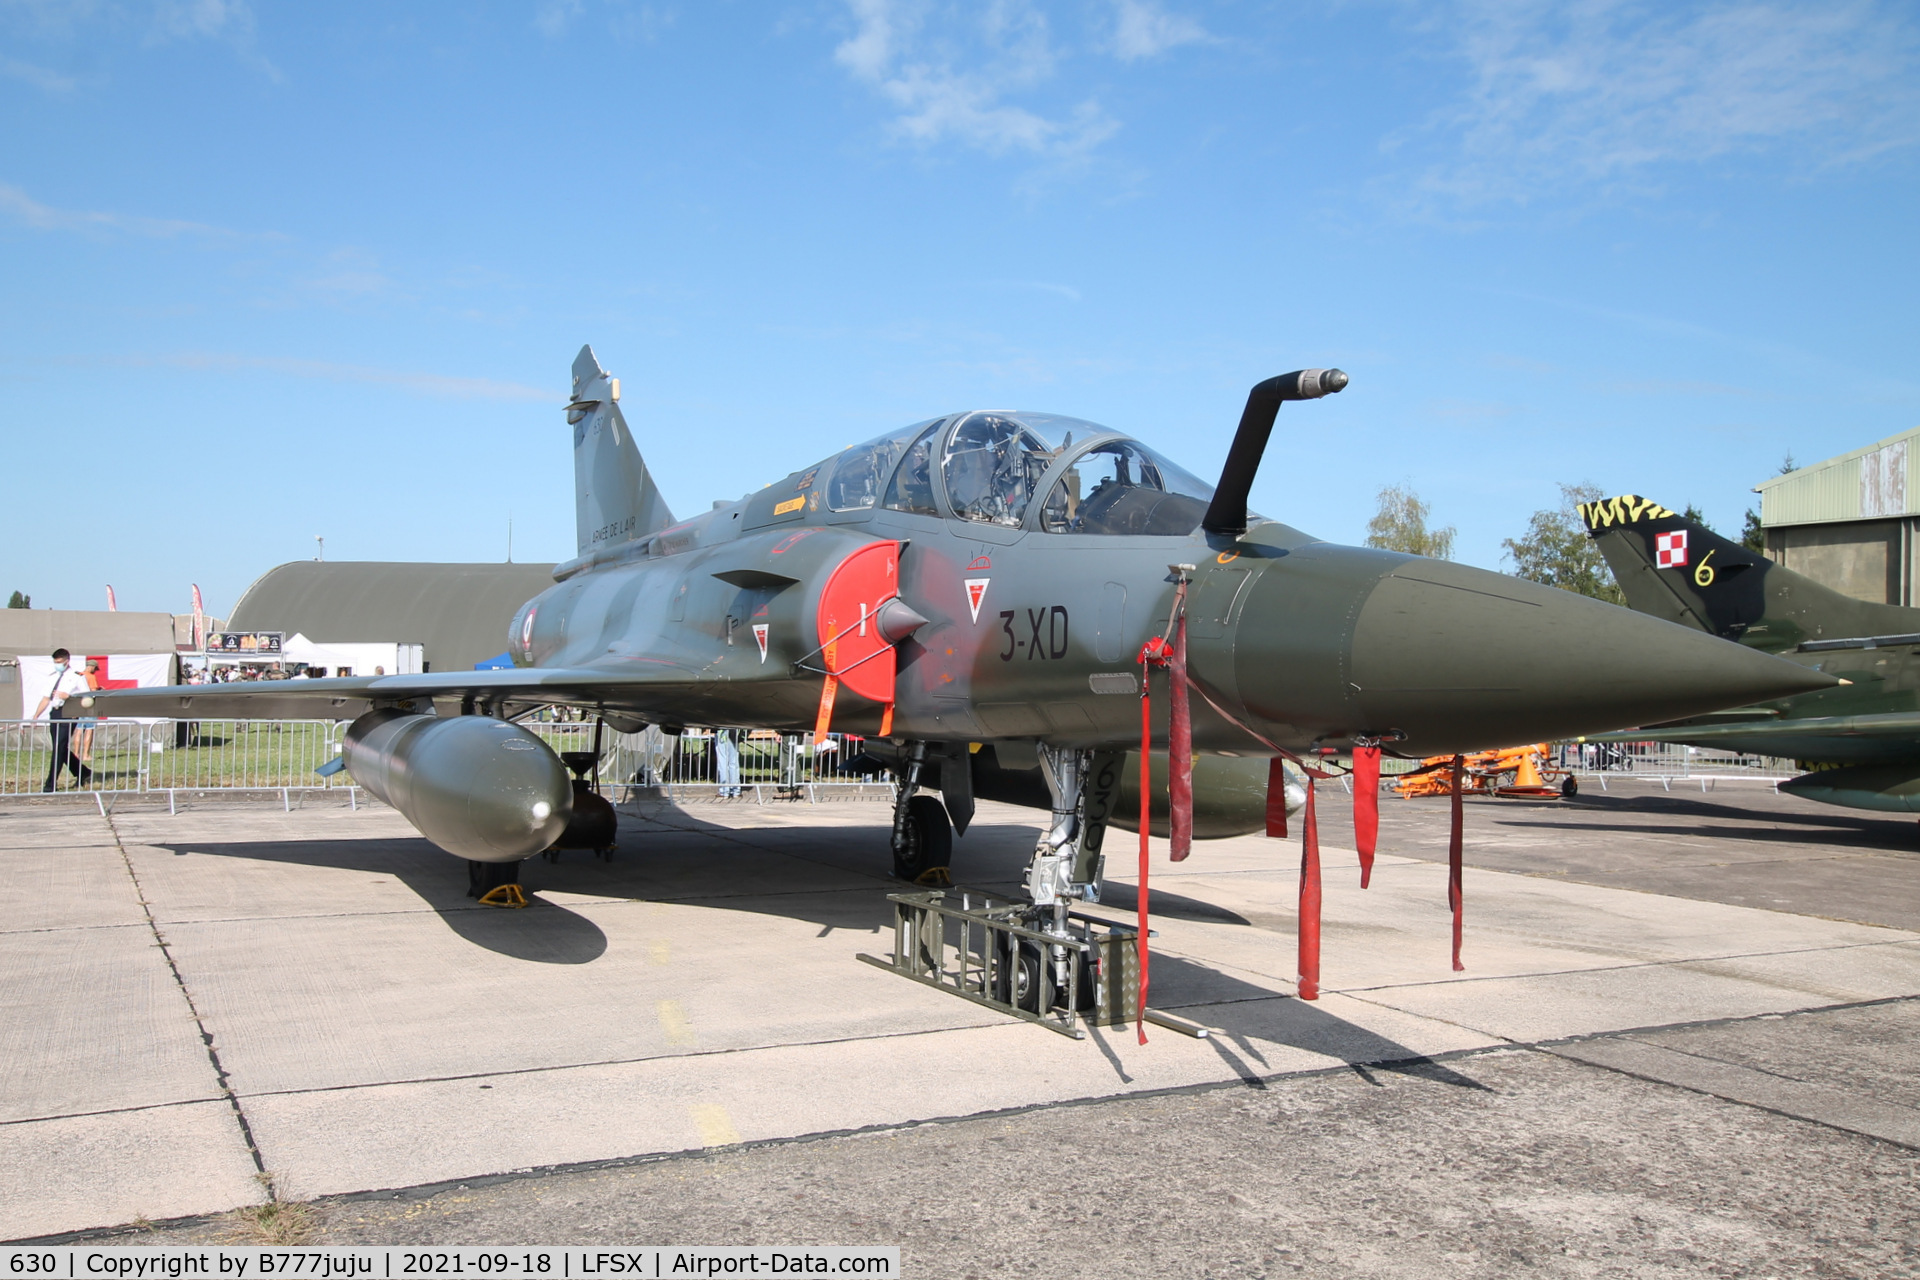 630, Dassault Mirage 2000D C/N 432, during Luxeuil Air Show 2021